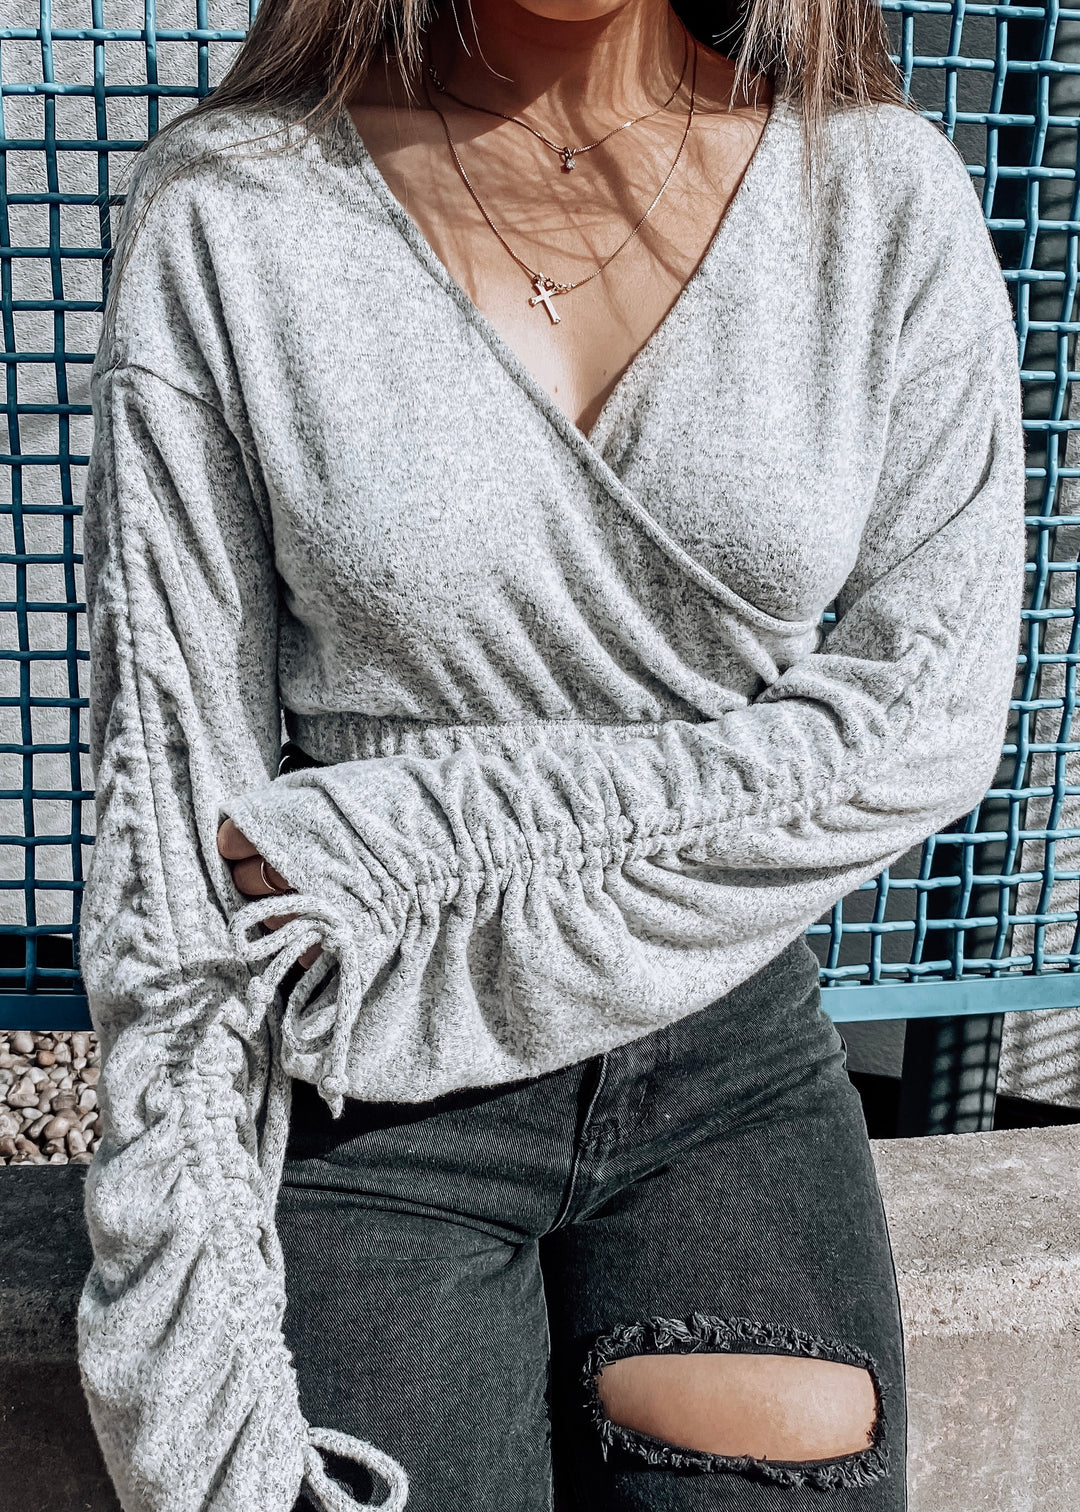 GREY CROPPED SWEATER WITH SLEEVE DETAIL